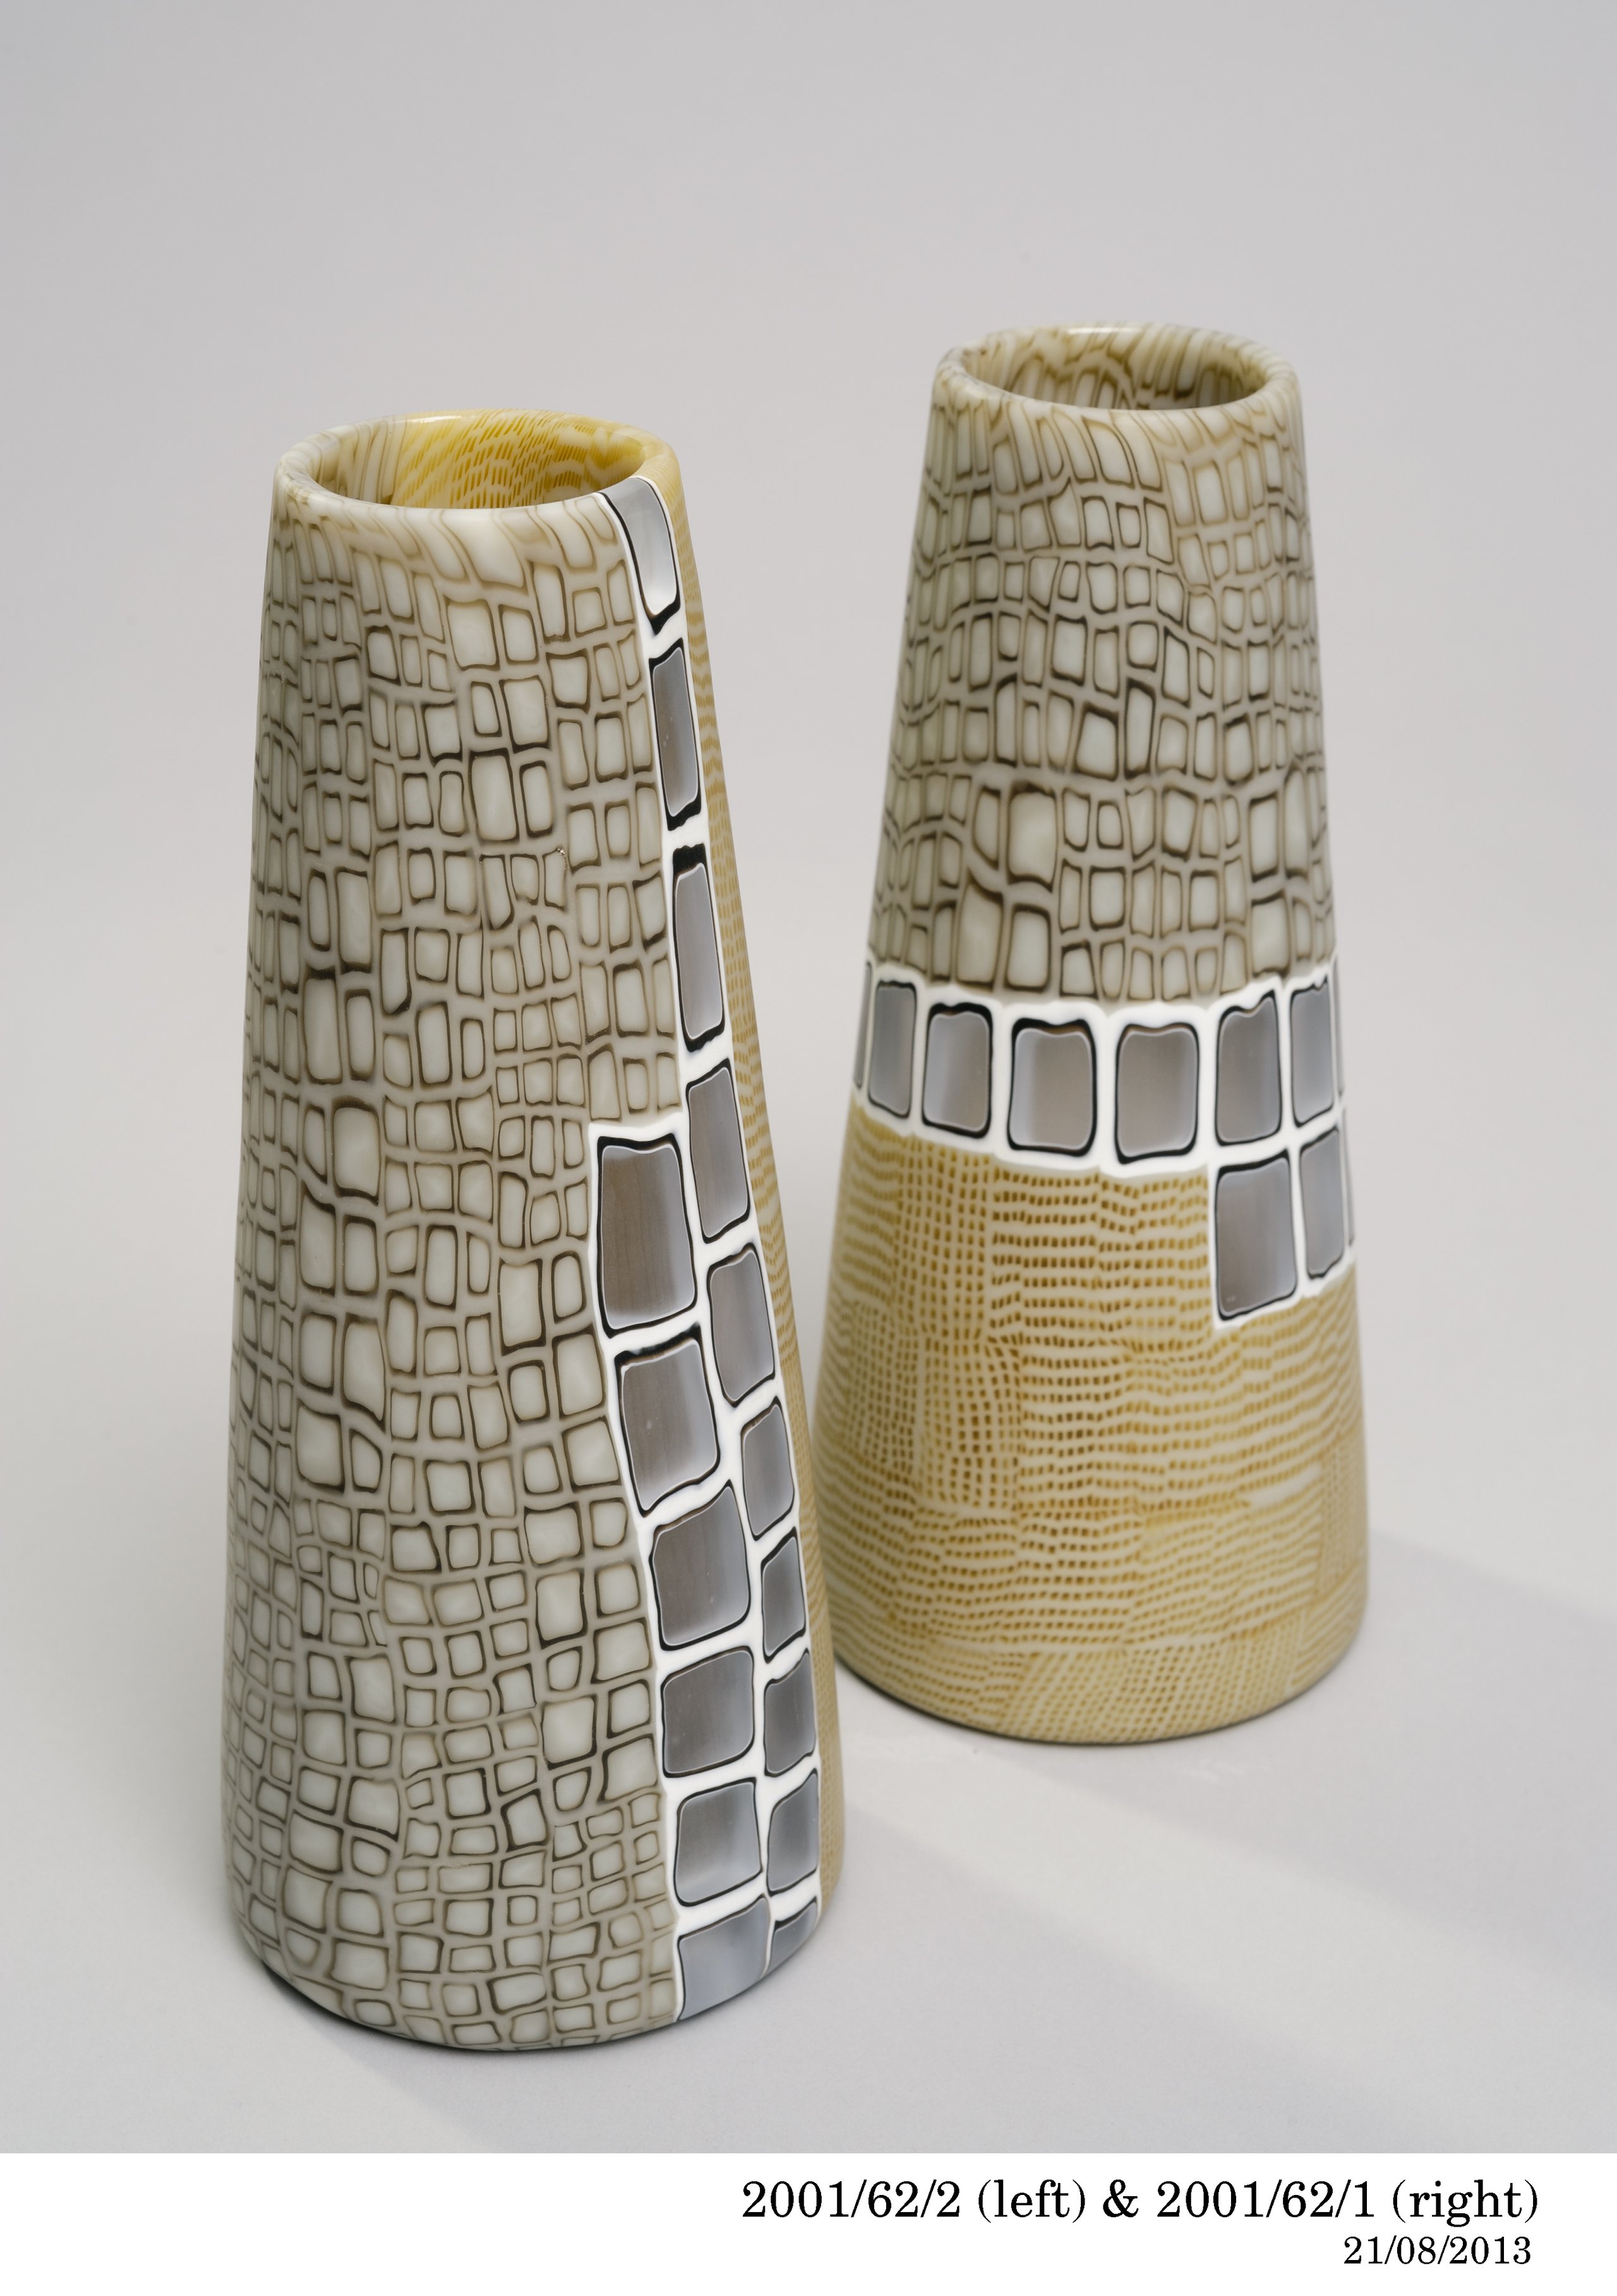 'Cell series' vase by Giles Bettison